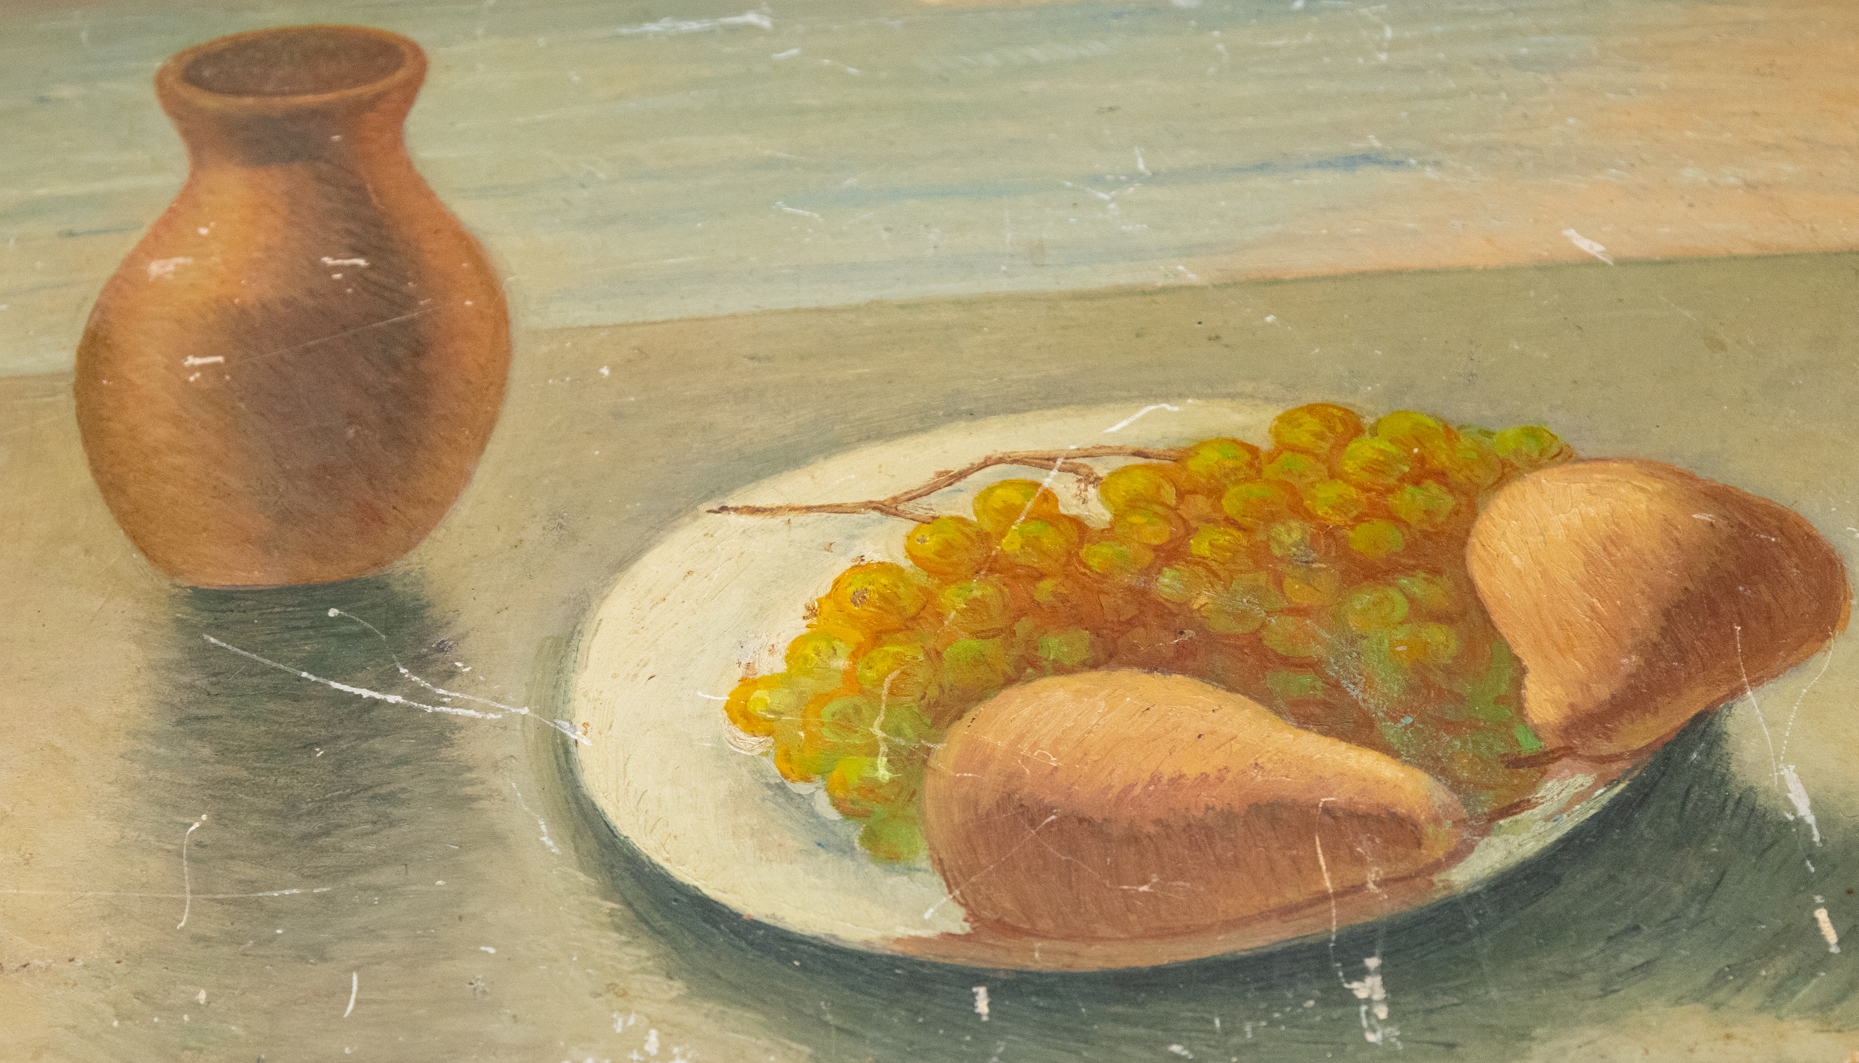 A painting depicts a clay pot, a plate of grapes, and two pieces of bread on a table.